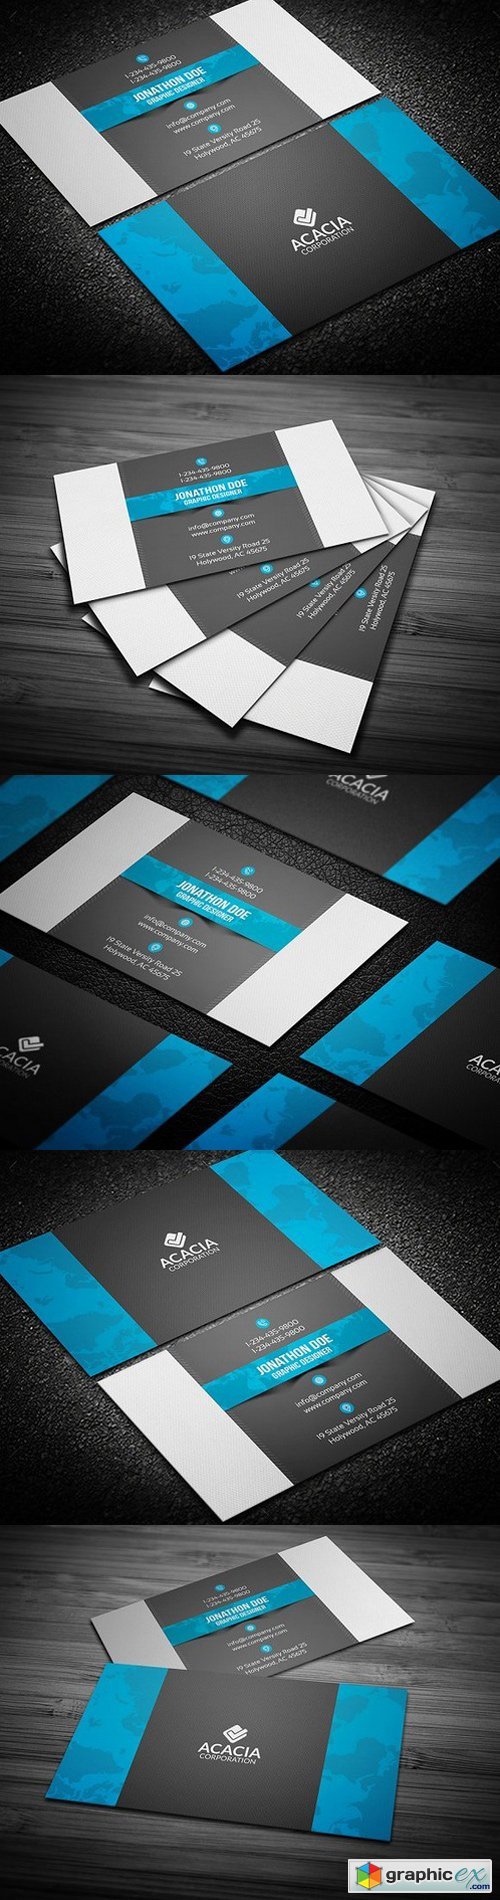 Cre Business Card